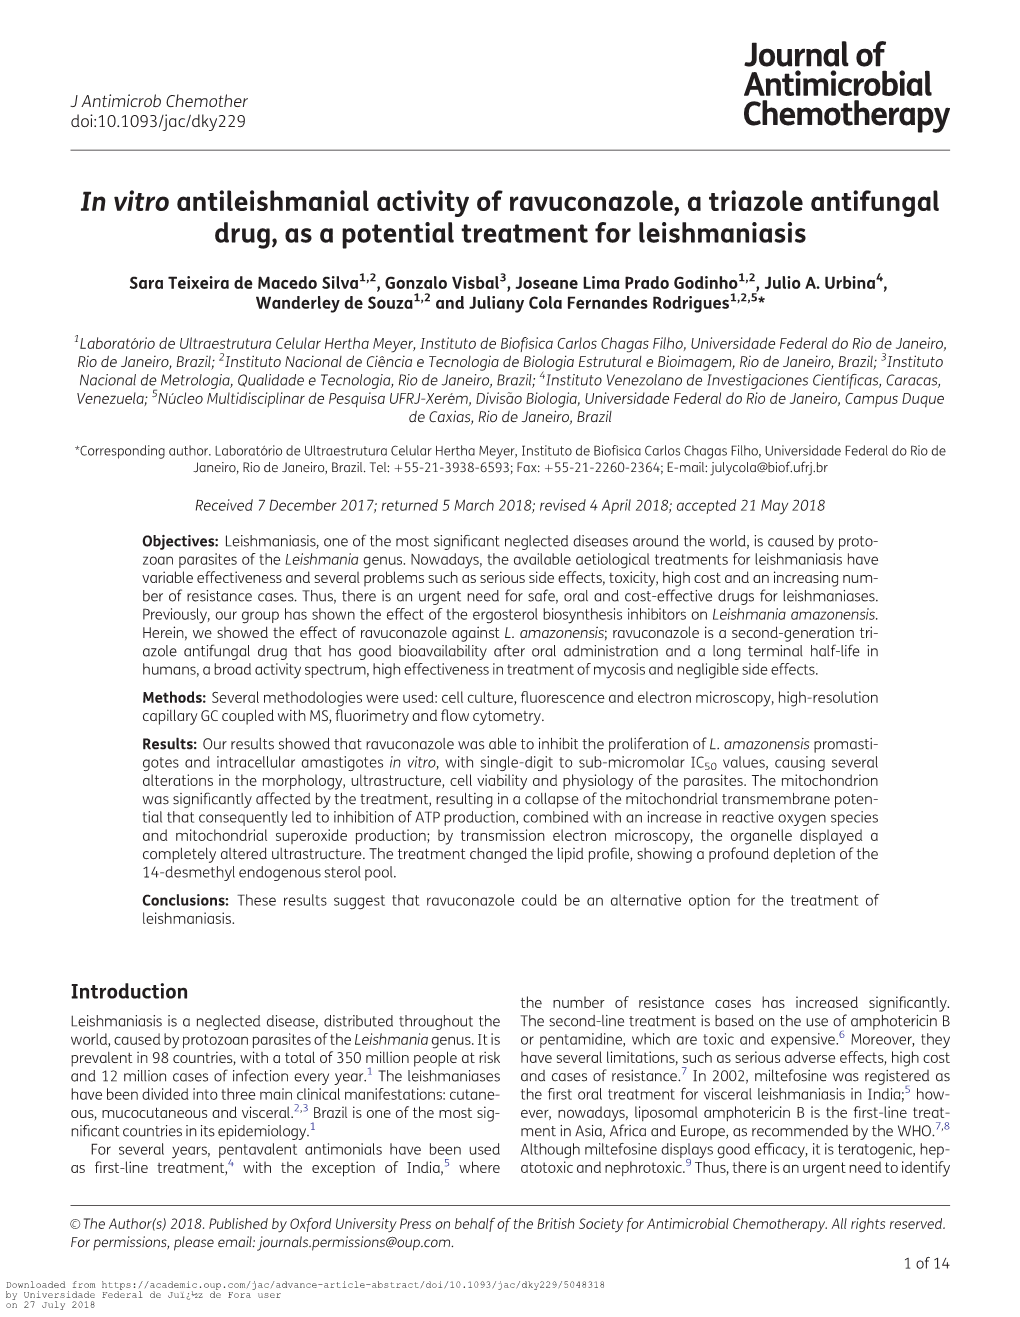 In Vitro Antileishmanial Activity of Ravuconazole, a Triazole Antifungal Drug, As a Potential Treatment for Leishmaniasis